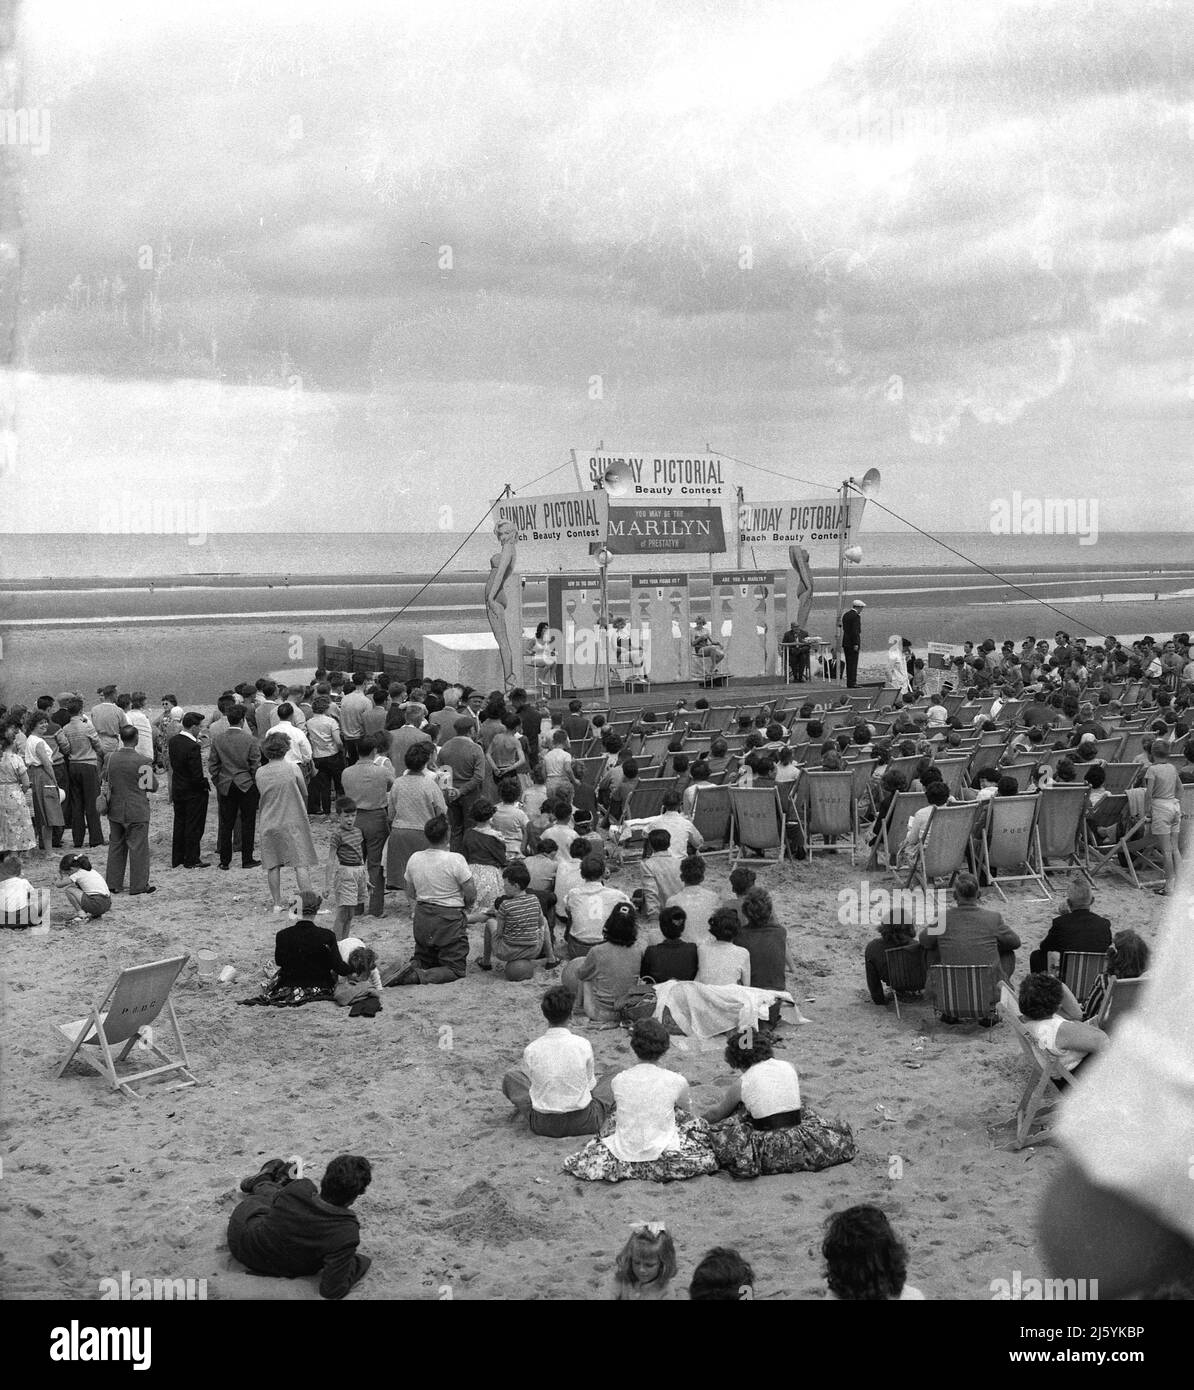 1957, people gather on the beach at Prestatyn, North Wales to watch a Sunday Pictorial Beach Beauty Contest. The newspaper had organised a 'You May Be The MARILYN of Prestatyn Sands Competition, to find a female whose figure matched that of Marilyn Monroe. In the 1950s and early 60s, the American actress had become not just a hollywood superstar but an international one. On the stage, three cut-outs, 1) How Do You Shape, B) Does Your Figure Fit? C) Are You A Marilyn? The Pictorial, as the newspaper was known, spend the summer of this year touring Britain's seaside resorts to find its Marilyn. Stock Photo